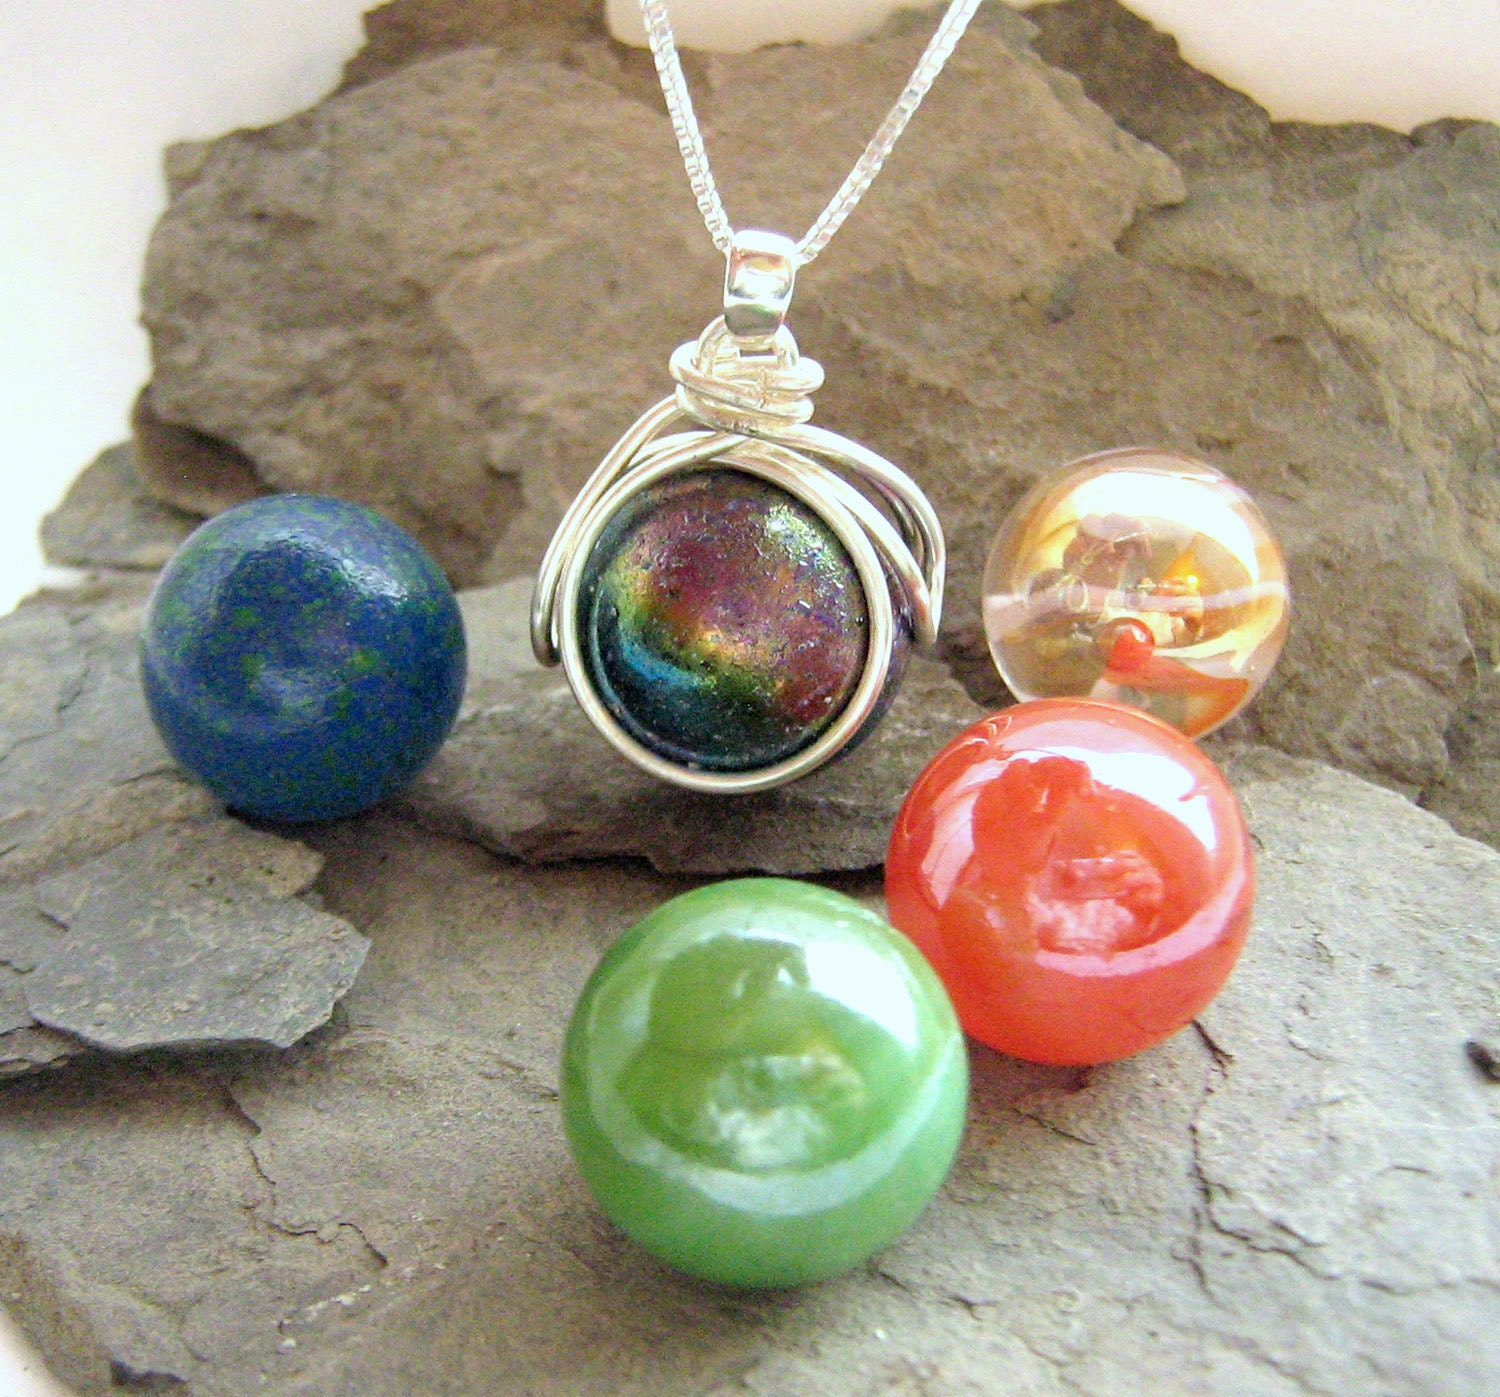 Multicolor Marble Glass Bead Necklace by Deborah S. Keen — Starworks - NC